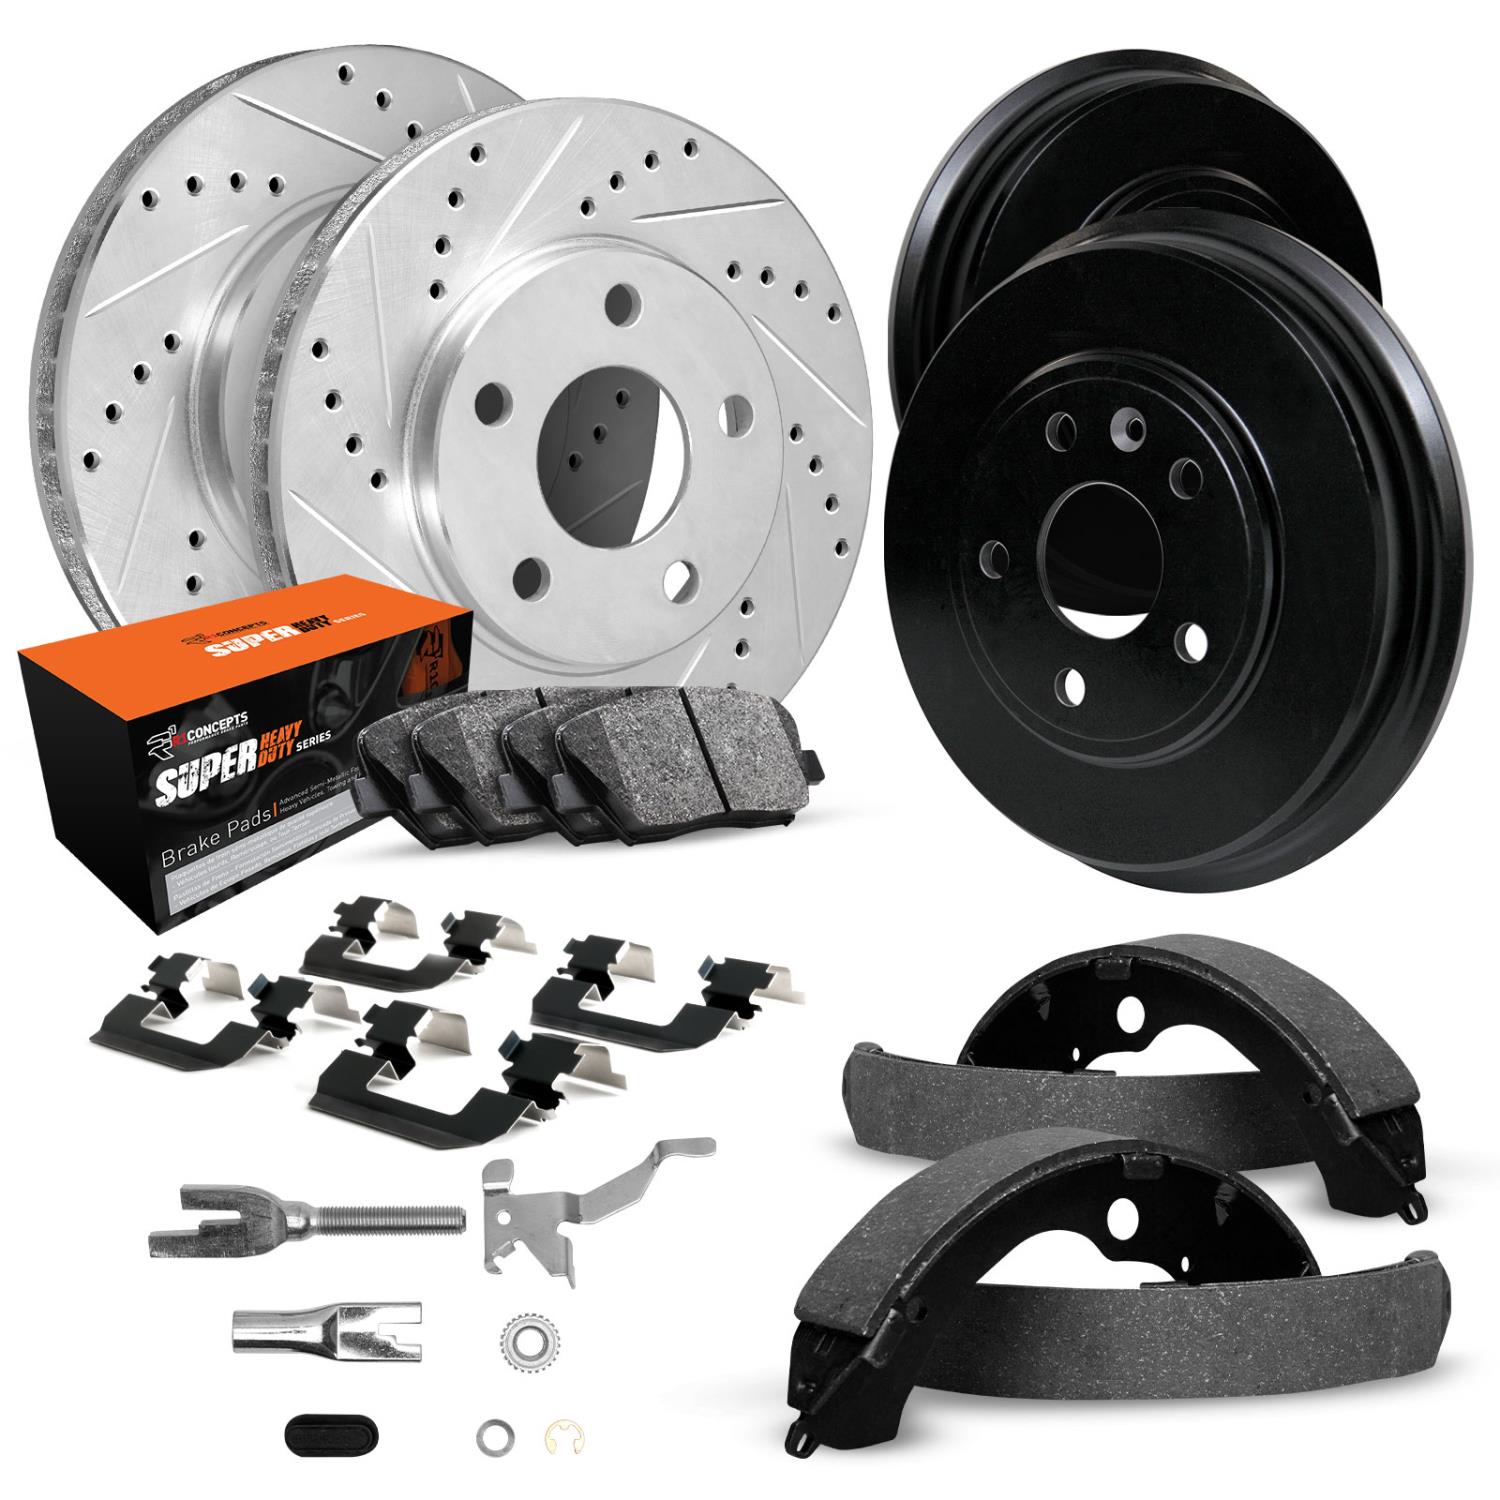 E-Line Drilled/Slotted Silver Rotor & Drum Set w/Super-Duty Pads, Shoes/Hardware/Adjusters, 1976-1985 Ford/Lincoln/Mercury/Mazda